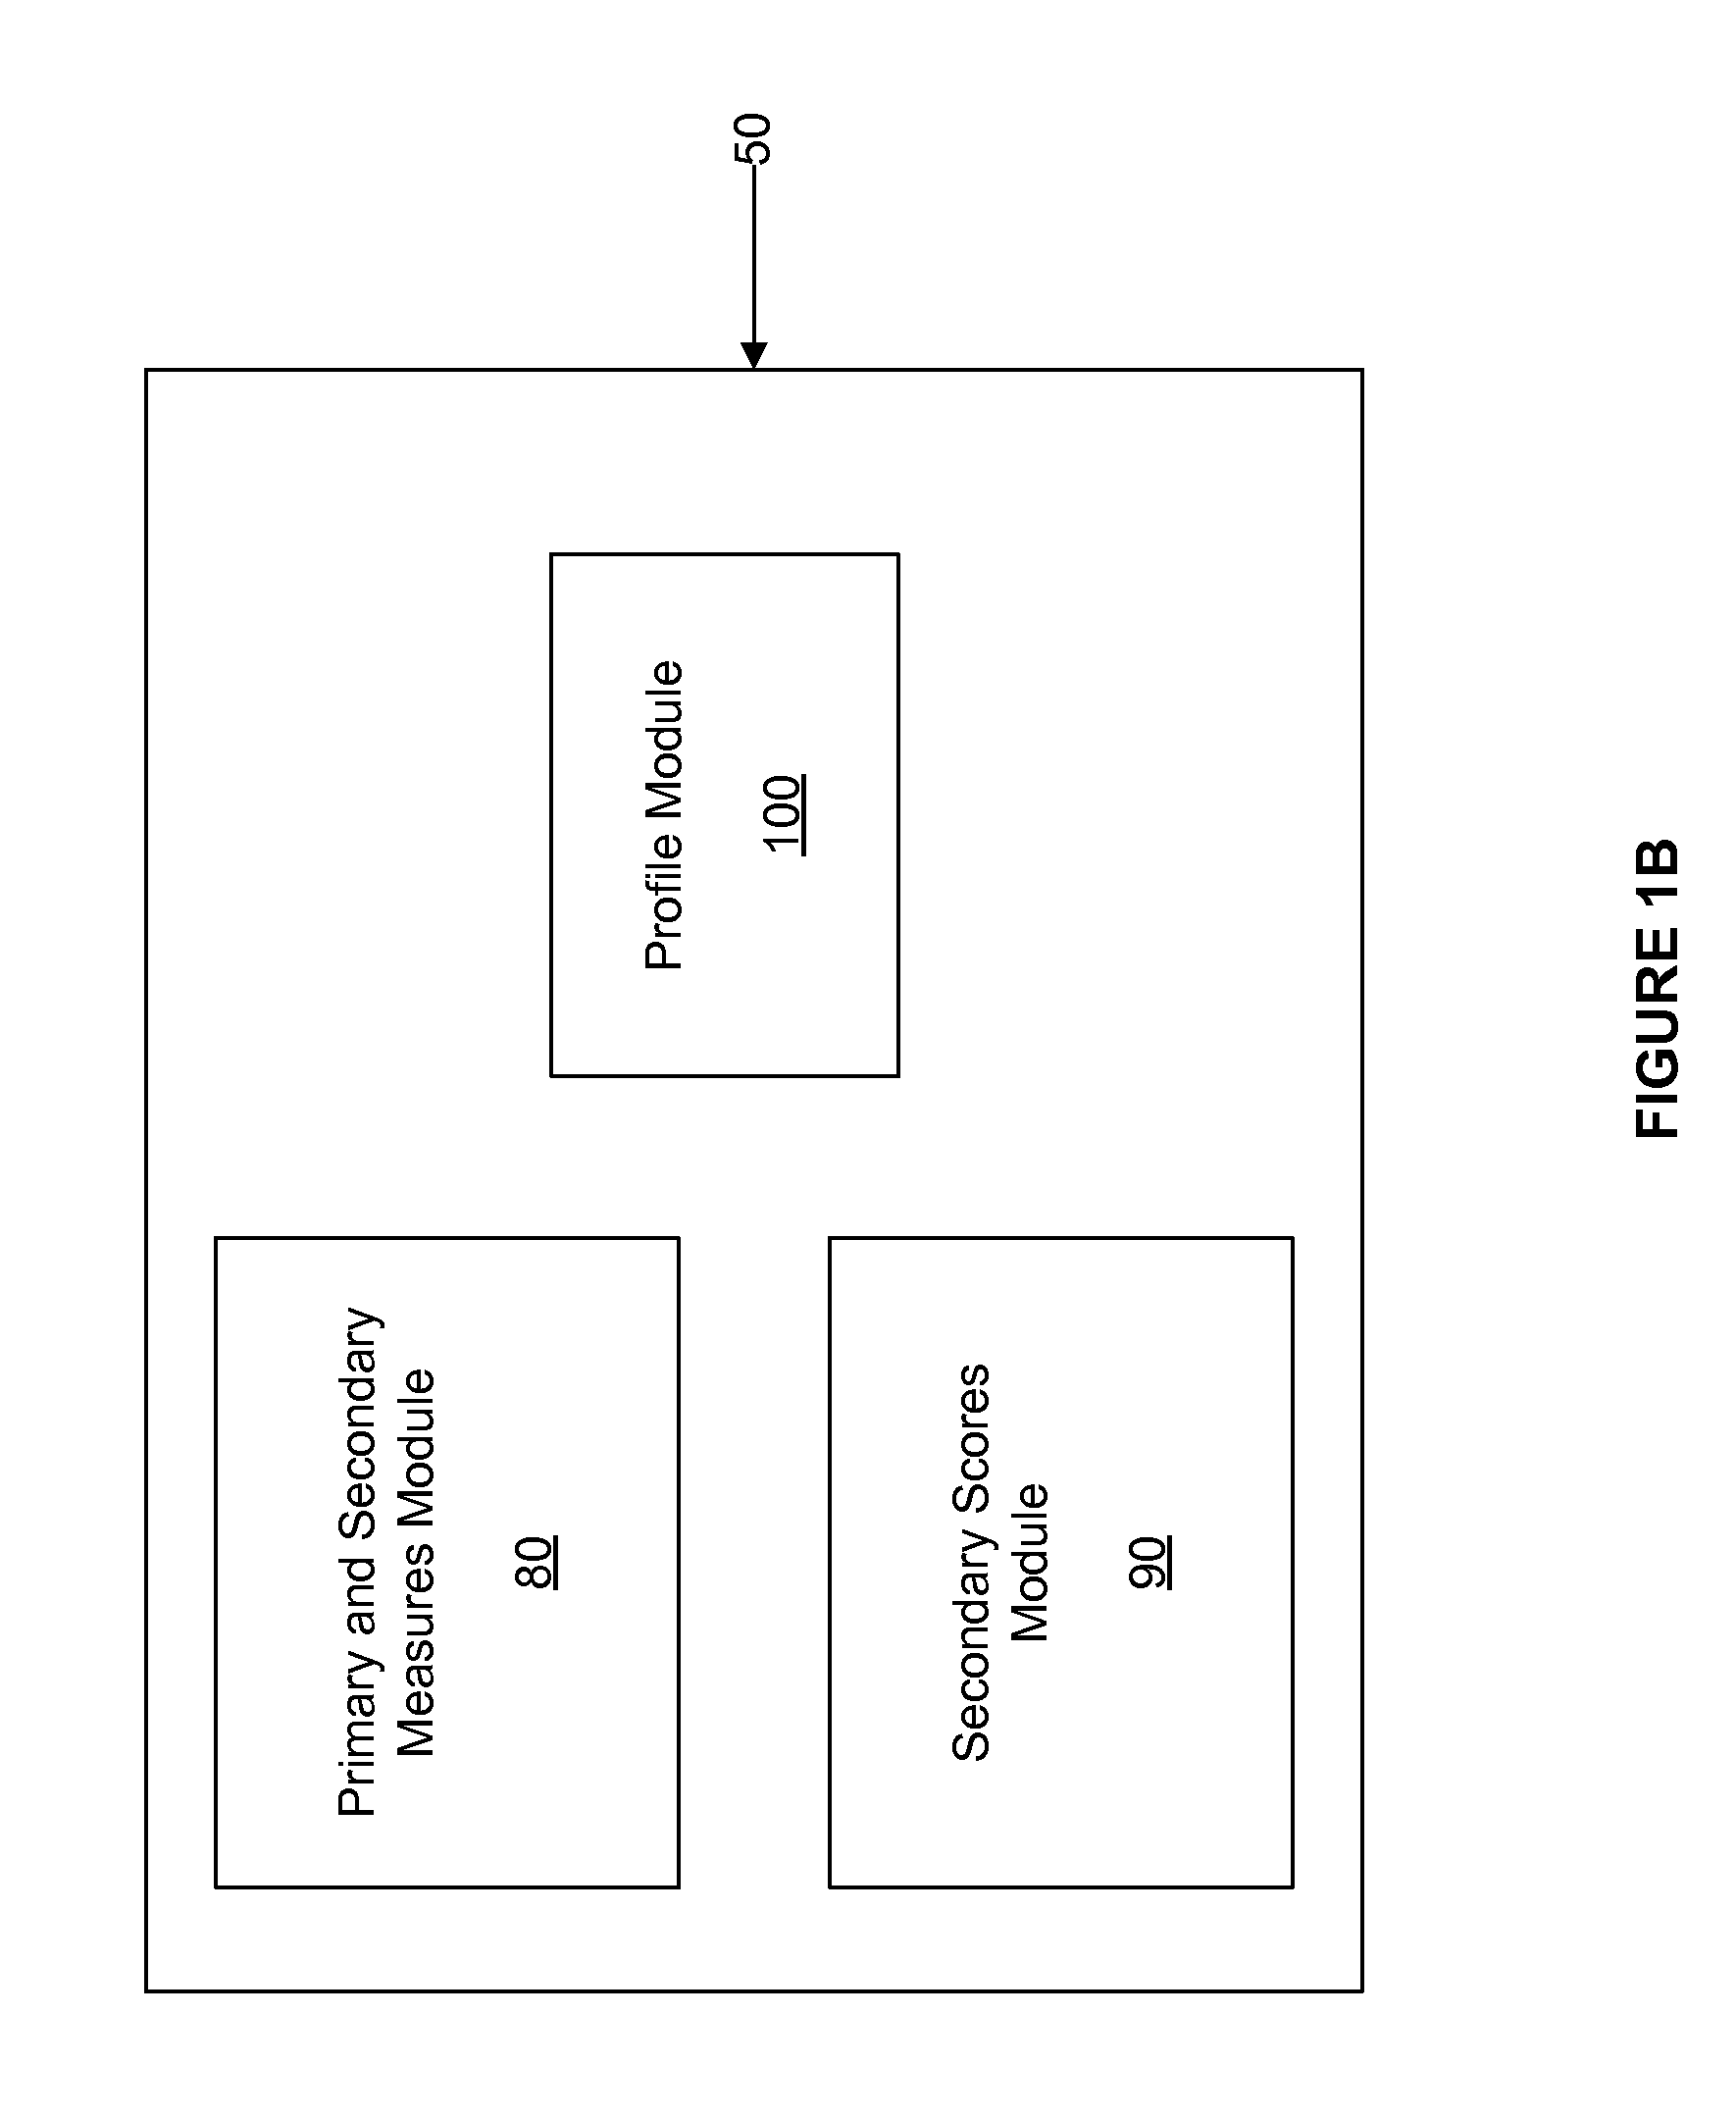 Interactive psychophysiological profiler method and system